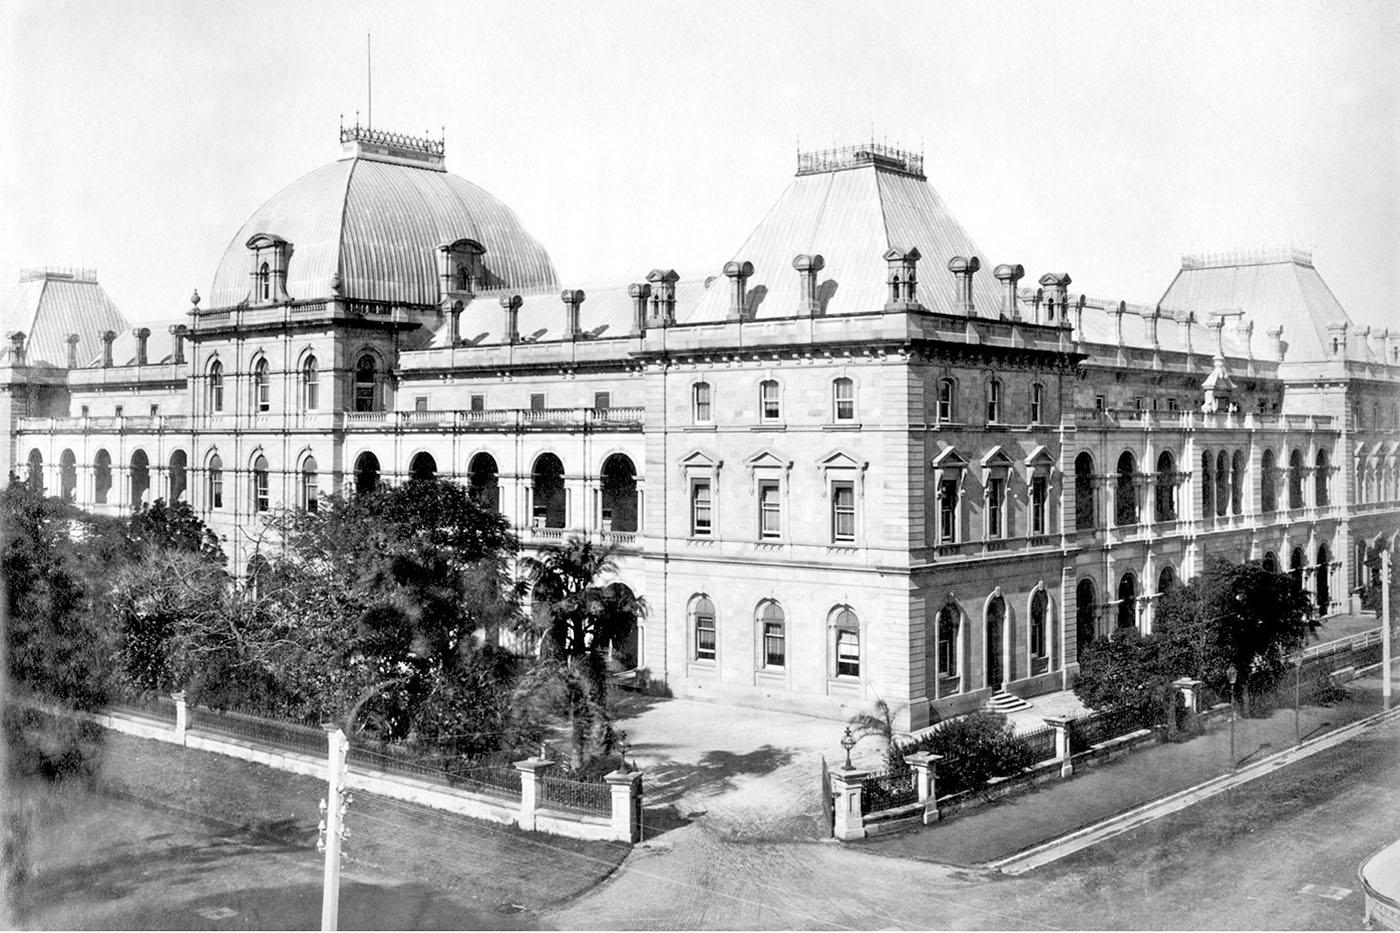 Parliament House - viewed from across Margaret Street and showing granduer of the architecture